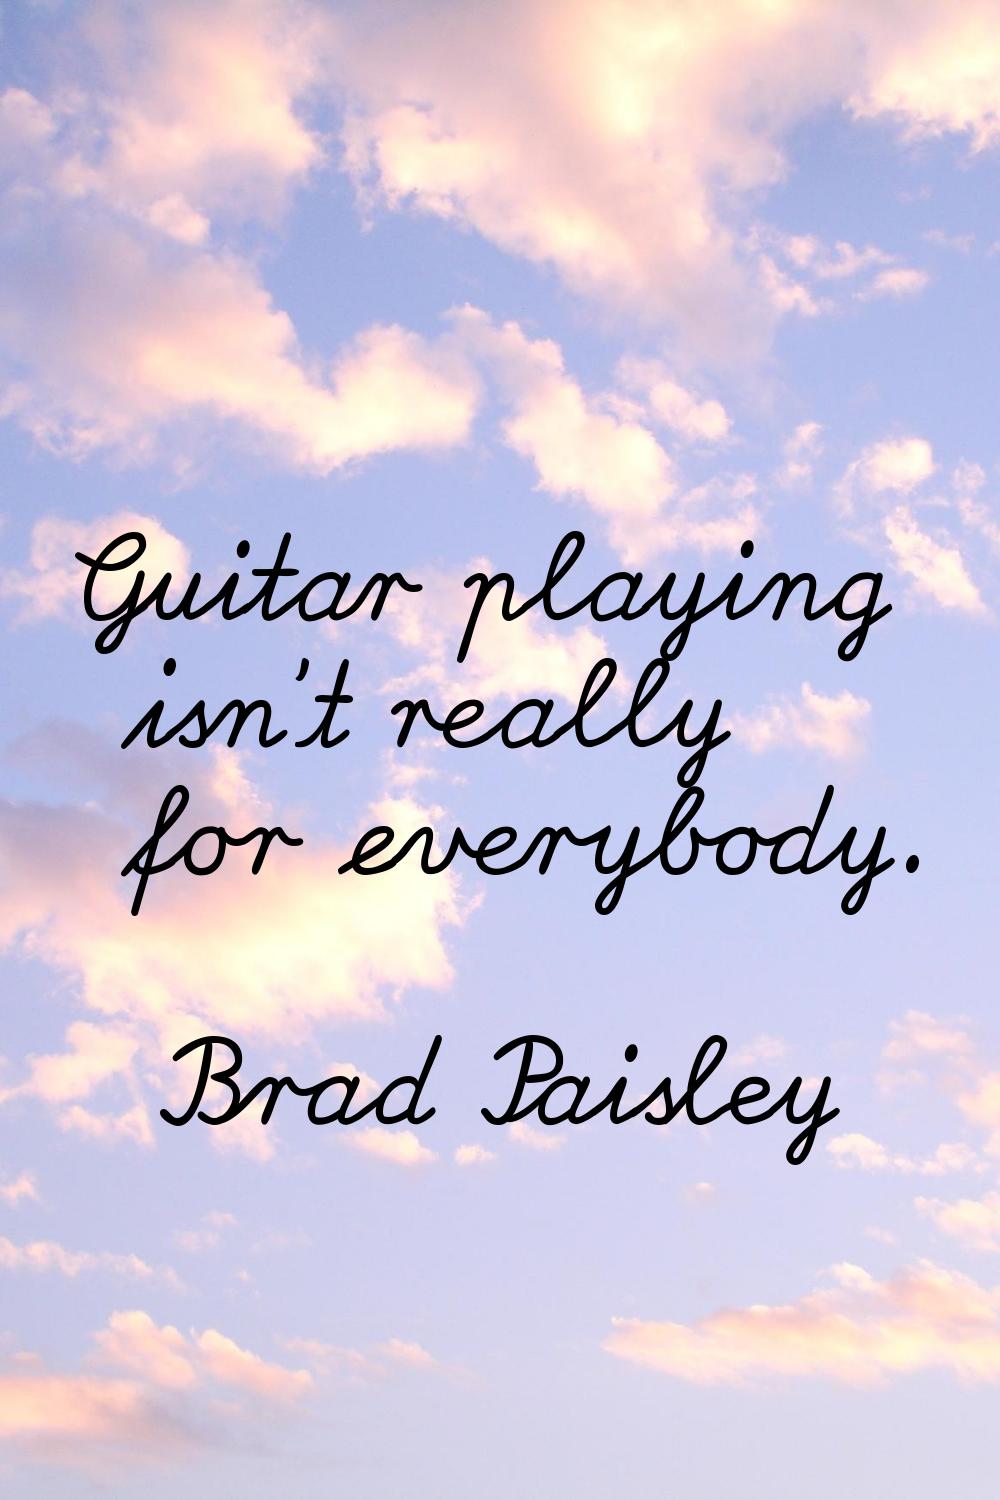 Guitar playing isn't really for everybody.